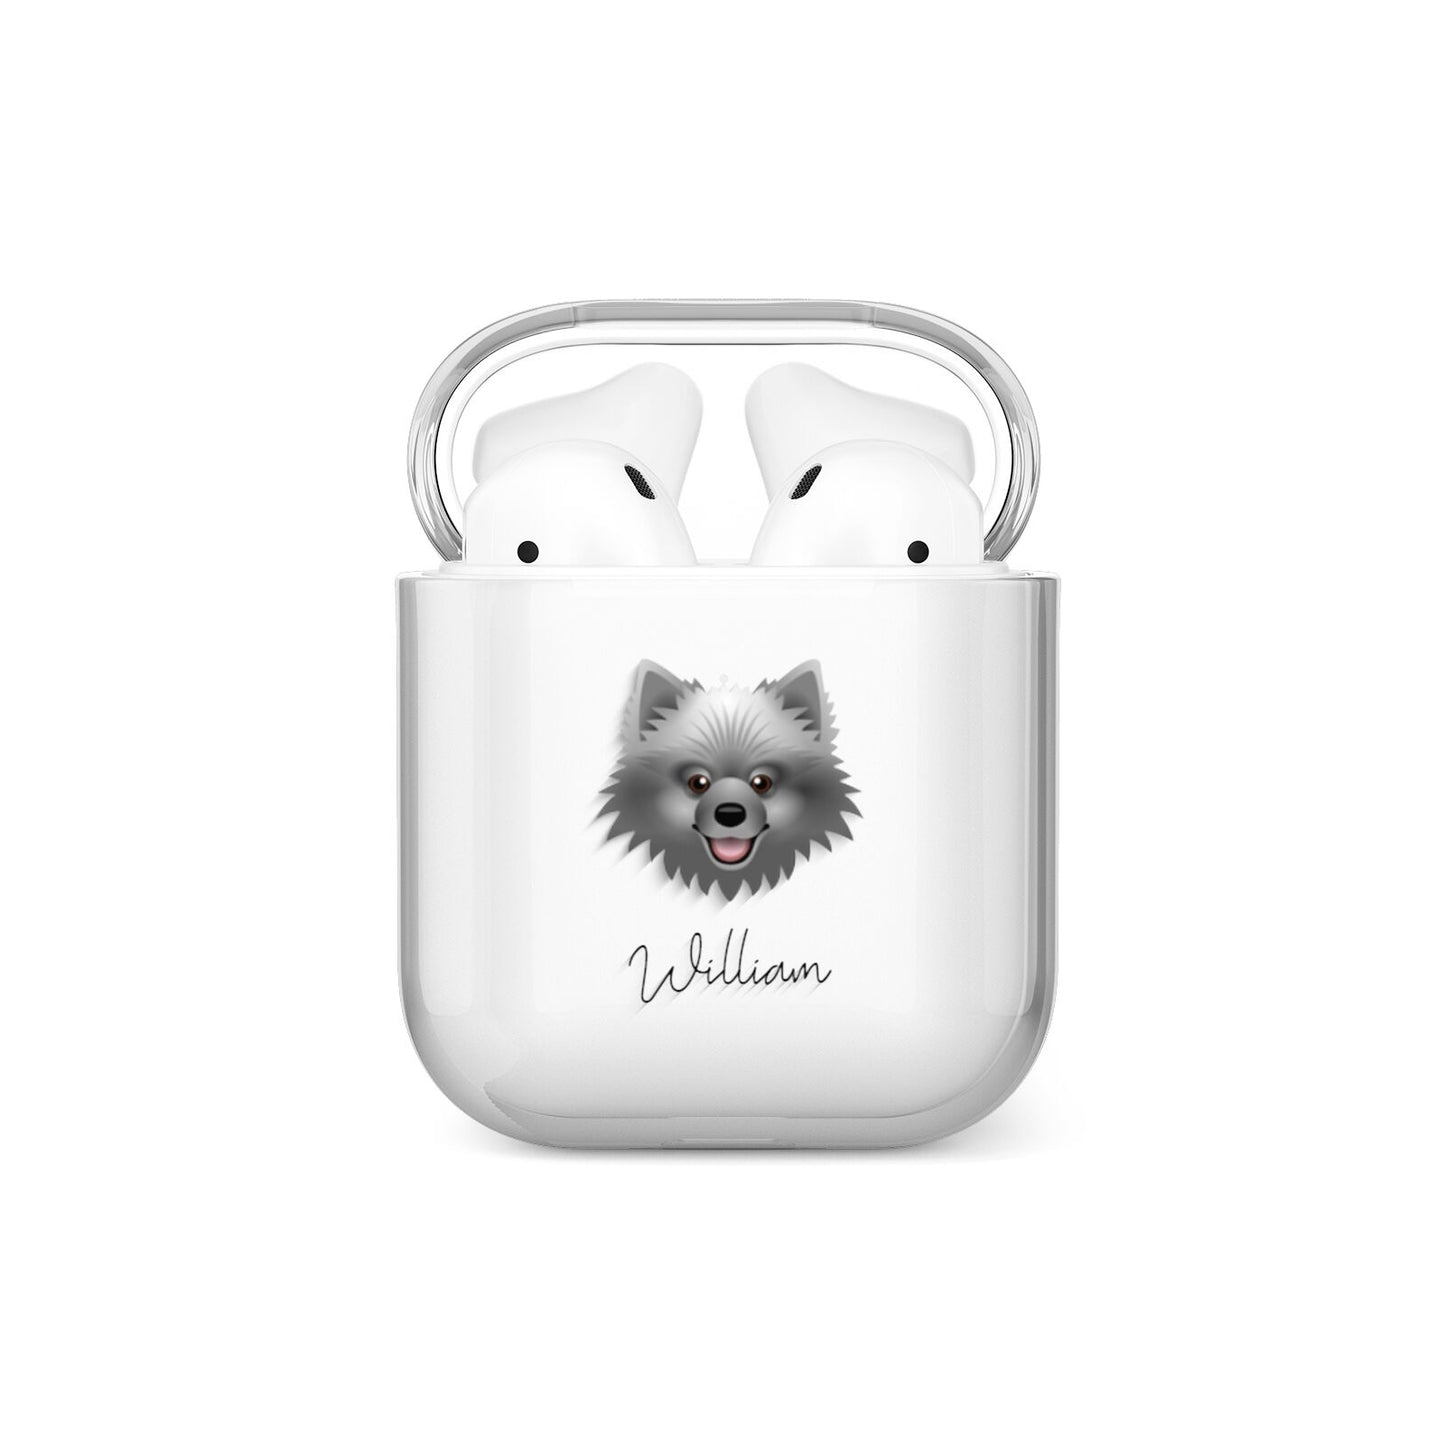 Keeshond Personalised AirPods Case